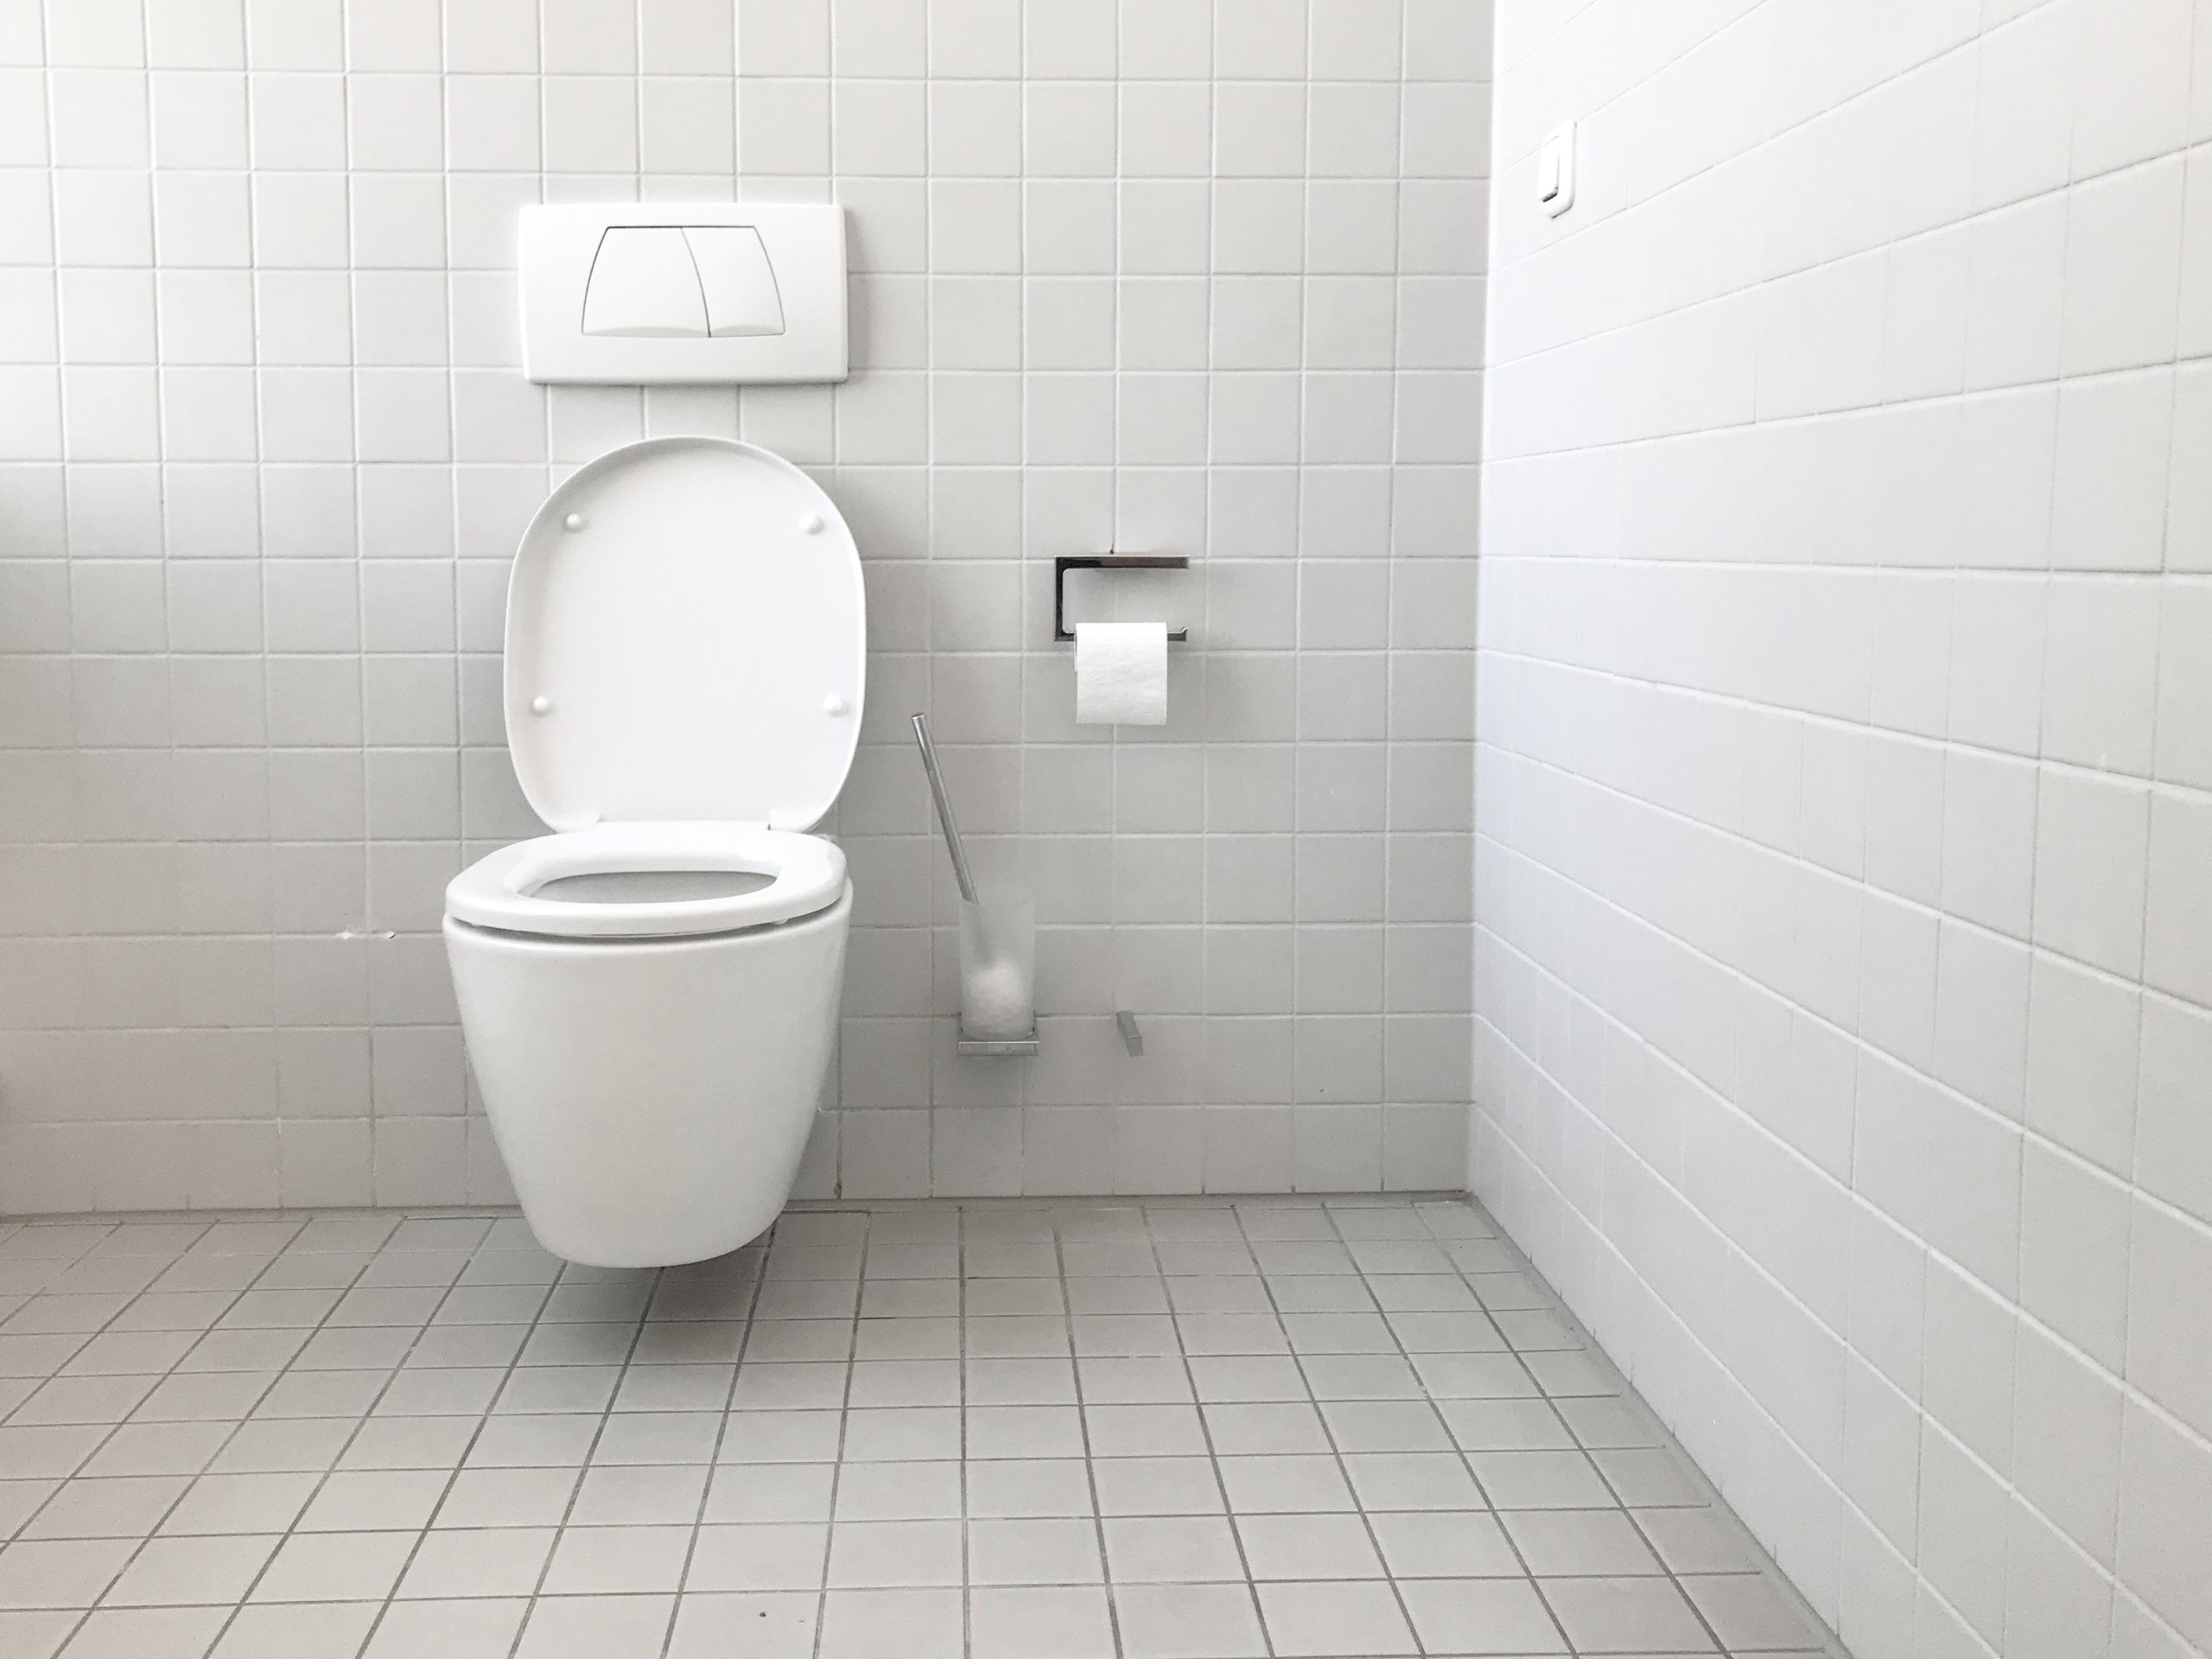 How to Thoroughly Clean a Toilet: a Step-by-Step Guide